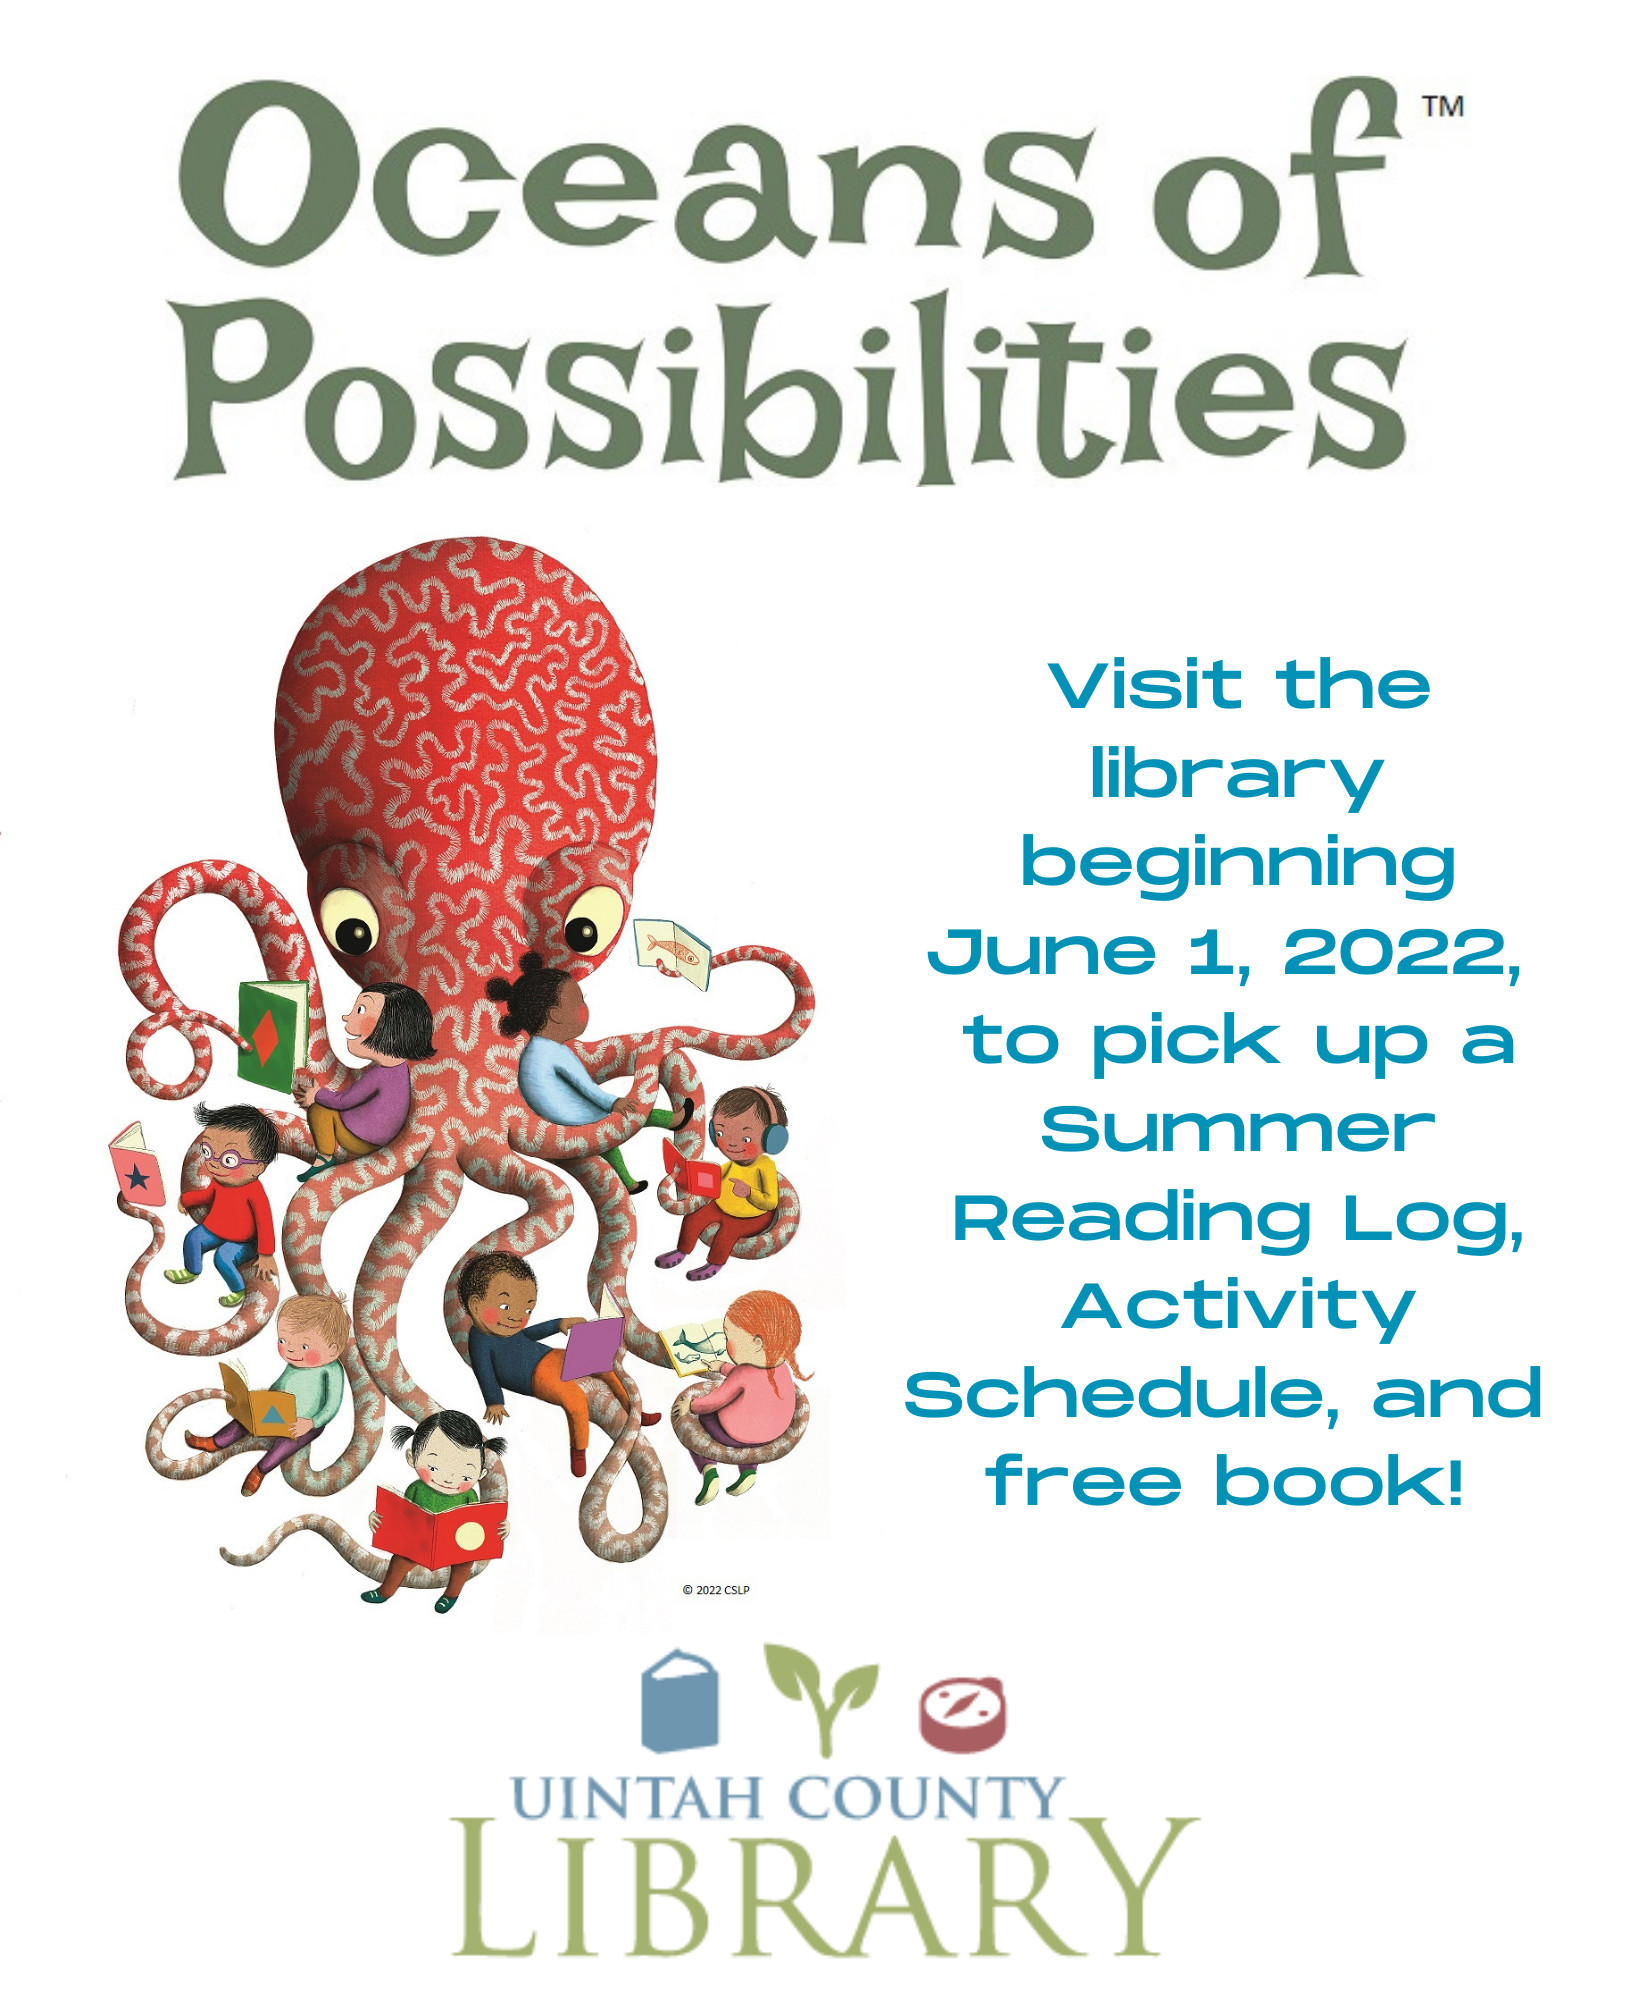 Oceans of Possibilities: Octopus supports children on its tentacles as children read books. Illustration by Sophie Blackall